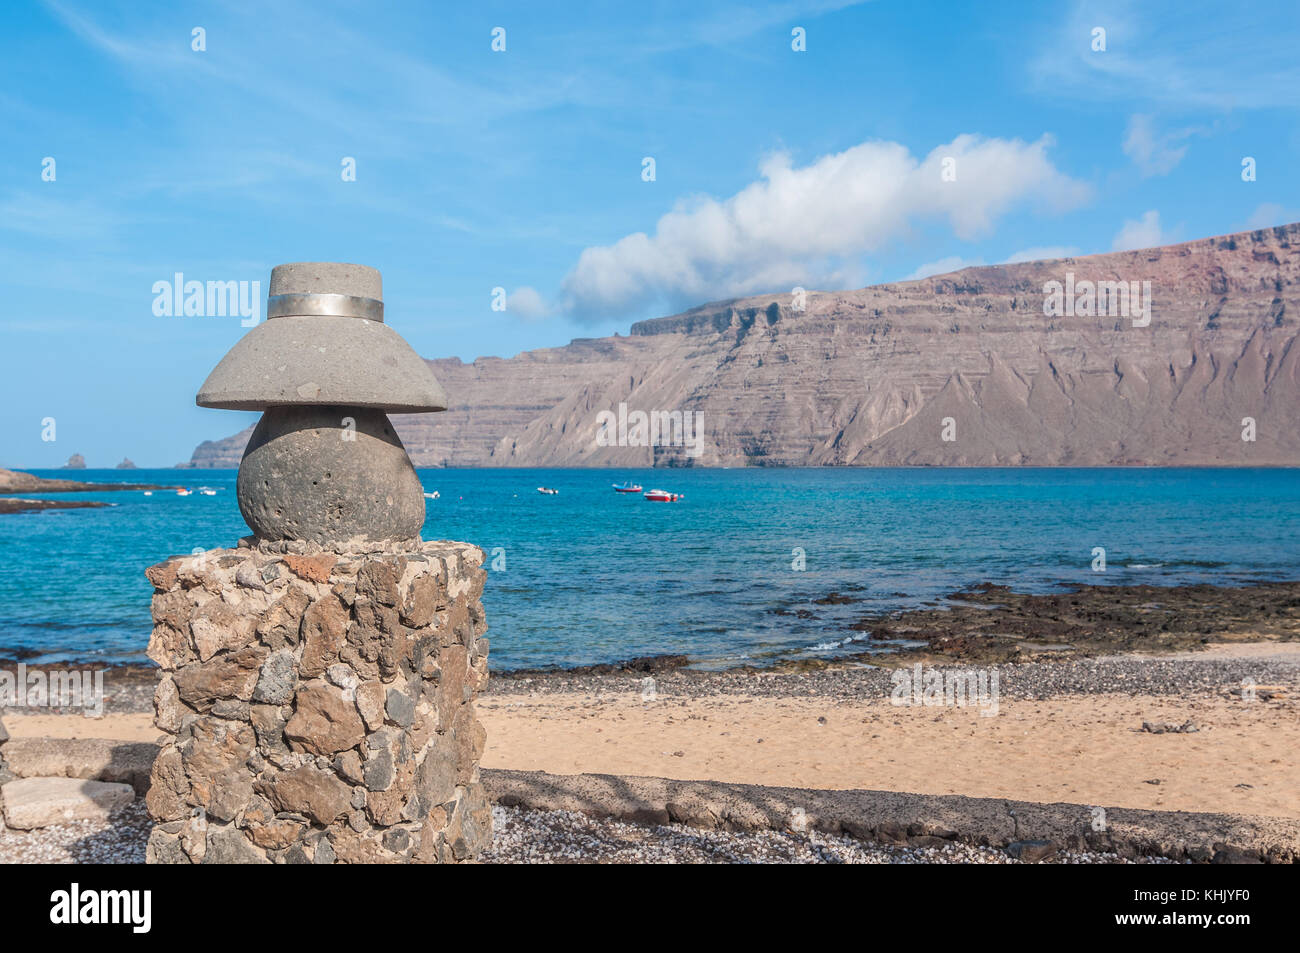 view of a typical street with a stone statue of a typical hat in the foreground and the beach in the background, La Graciosa, Canary Islands, Spain Stock Photo